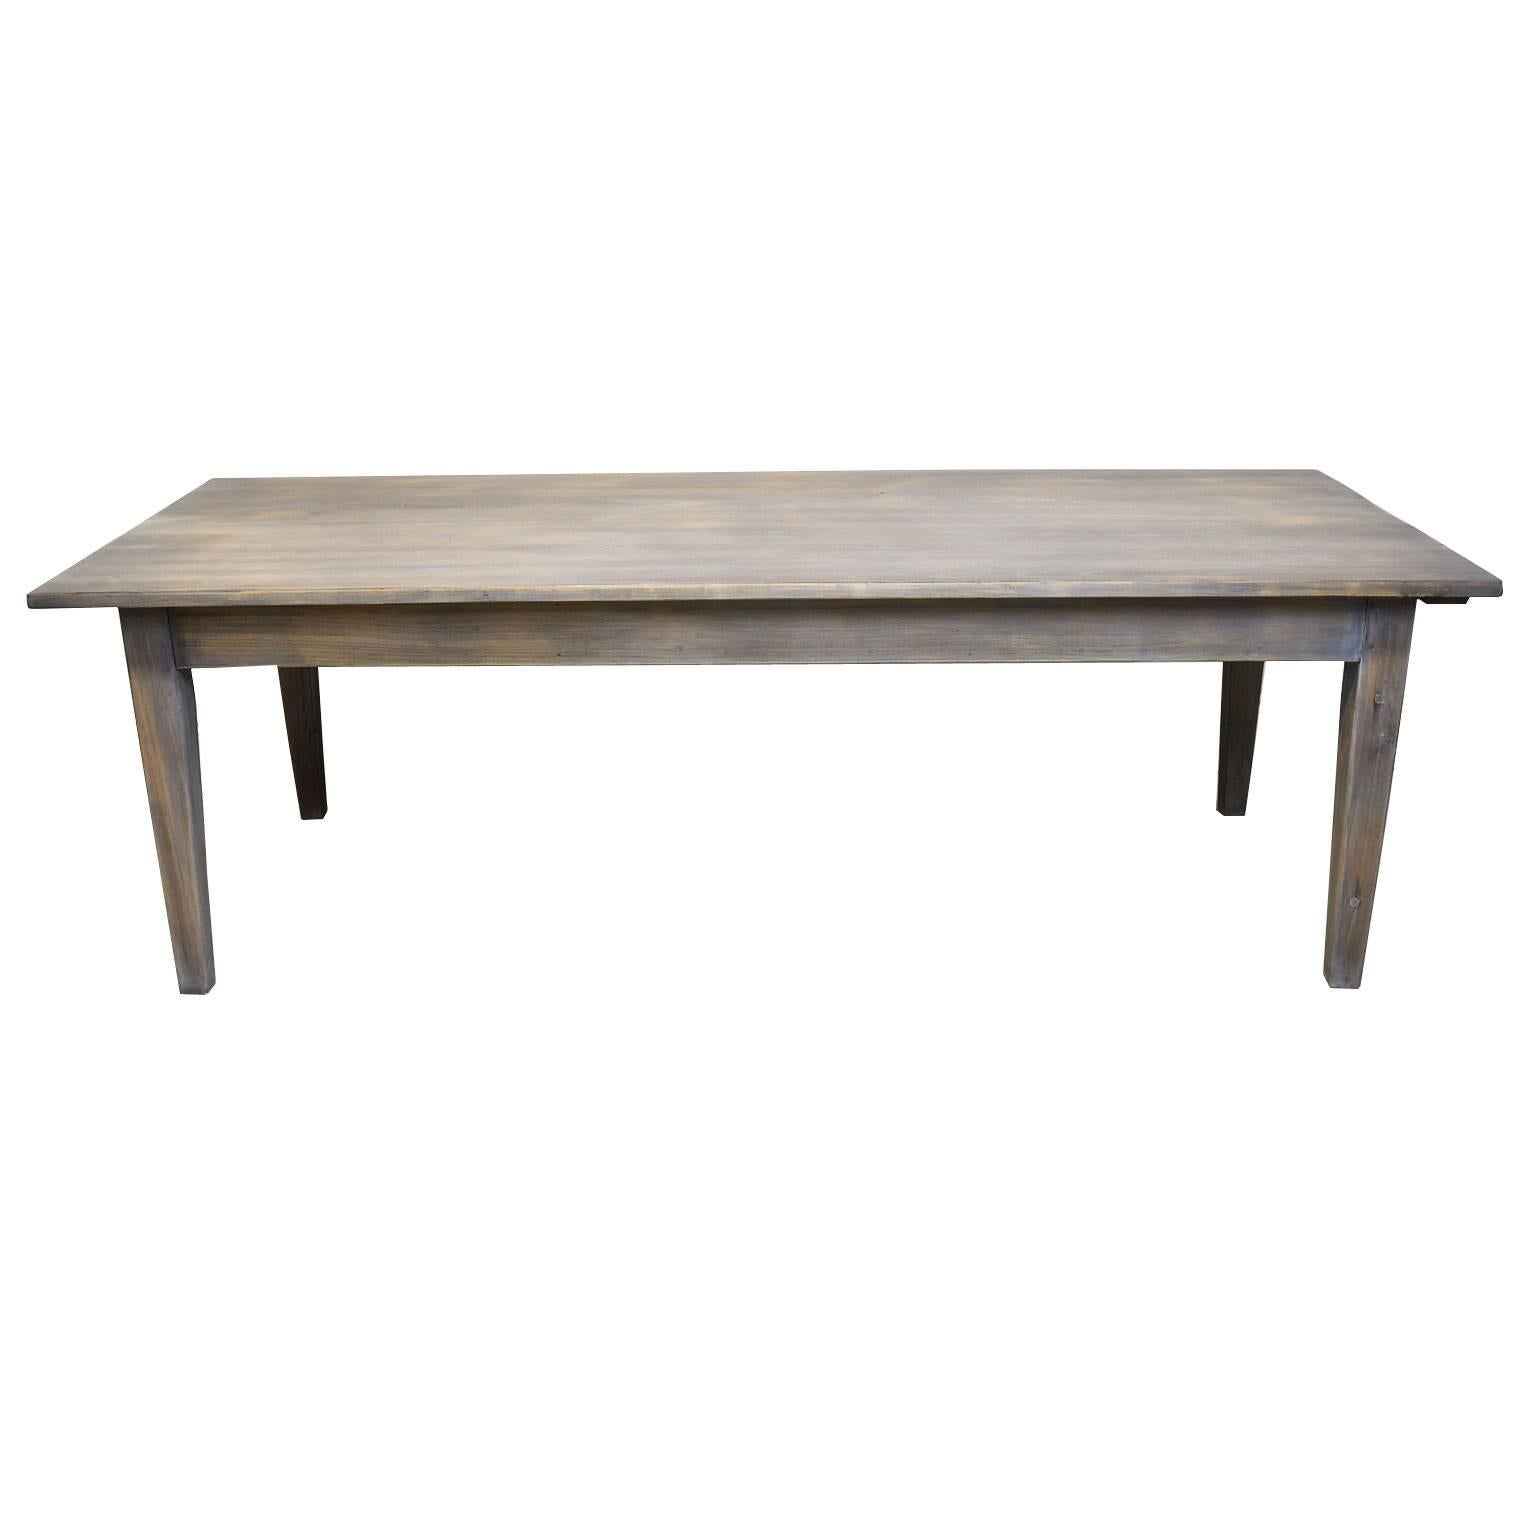 Oiled Farmhouse Dining or Kitchen Table in Re-Purposed Oak with Fumed-Taupe Finish